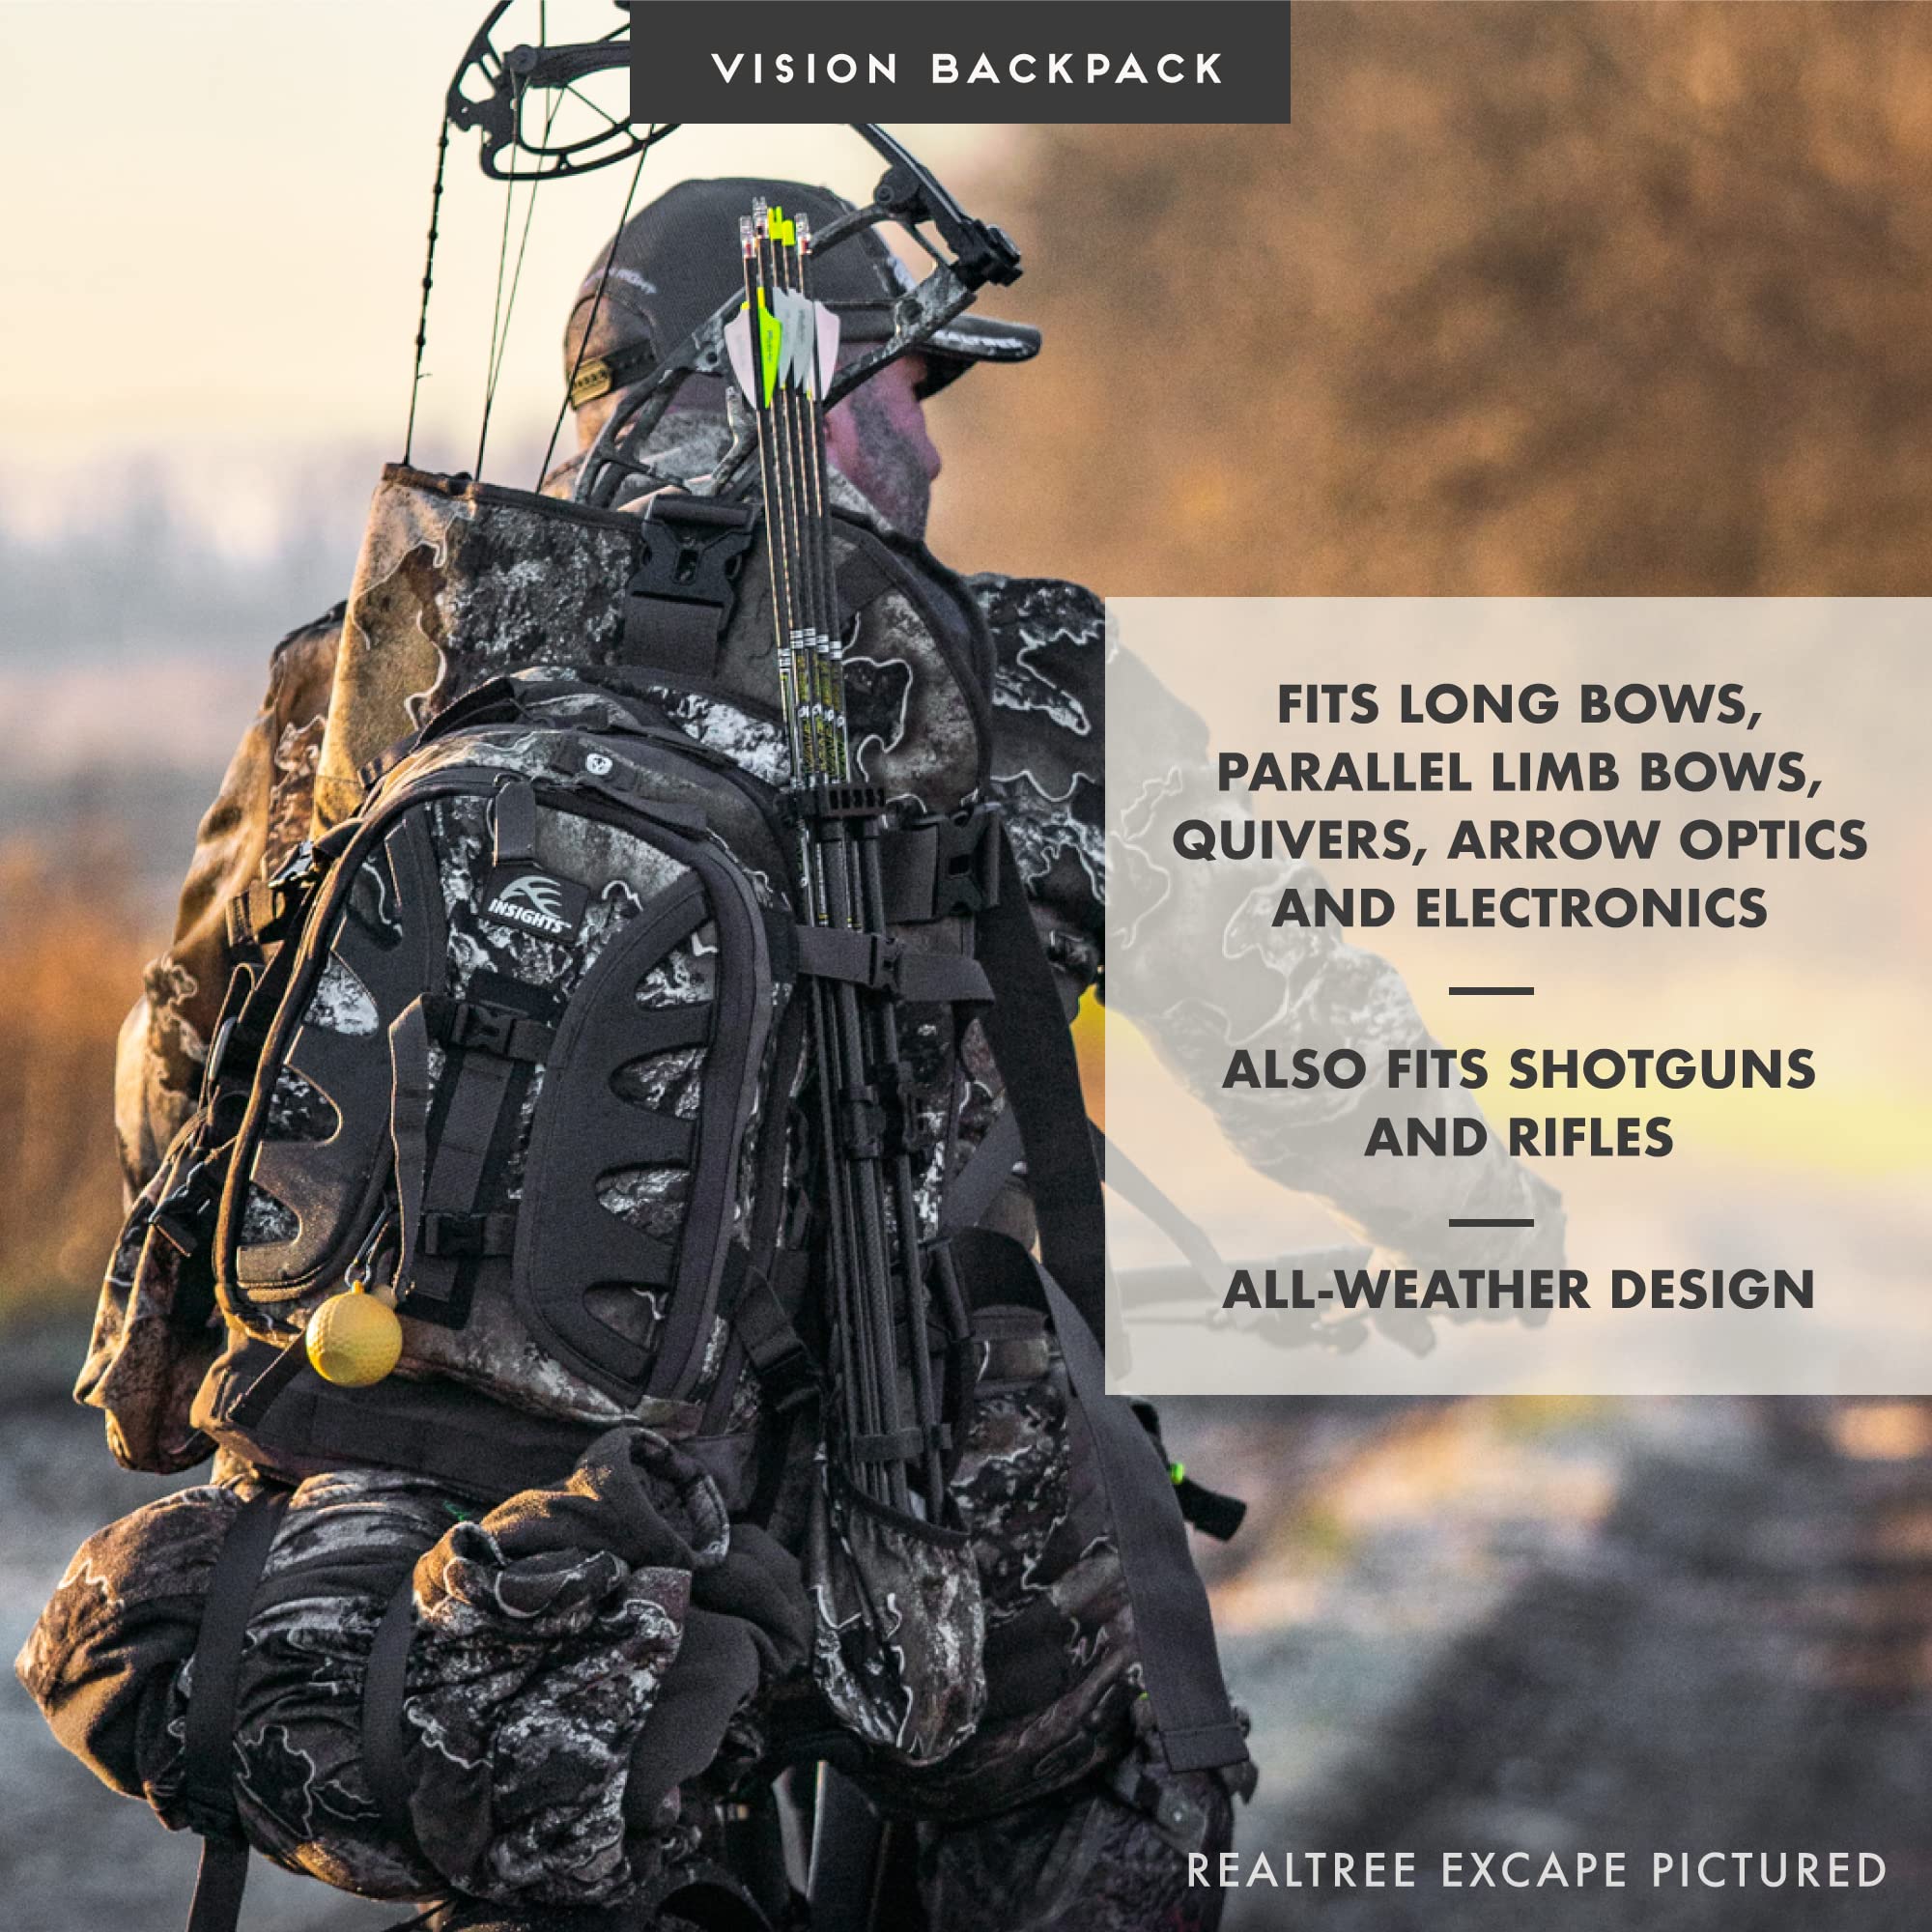 Insights Hunting by frogg toggs - The Vision Bow Pack, Camouflaged Backpack